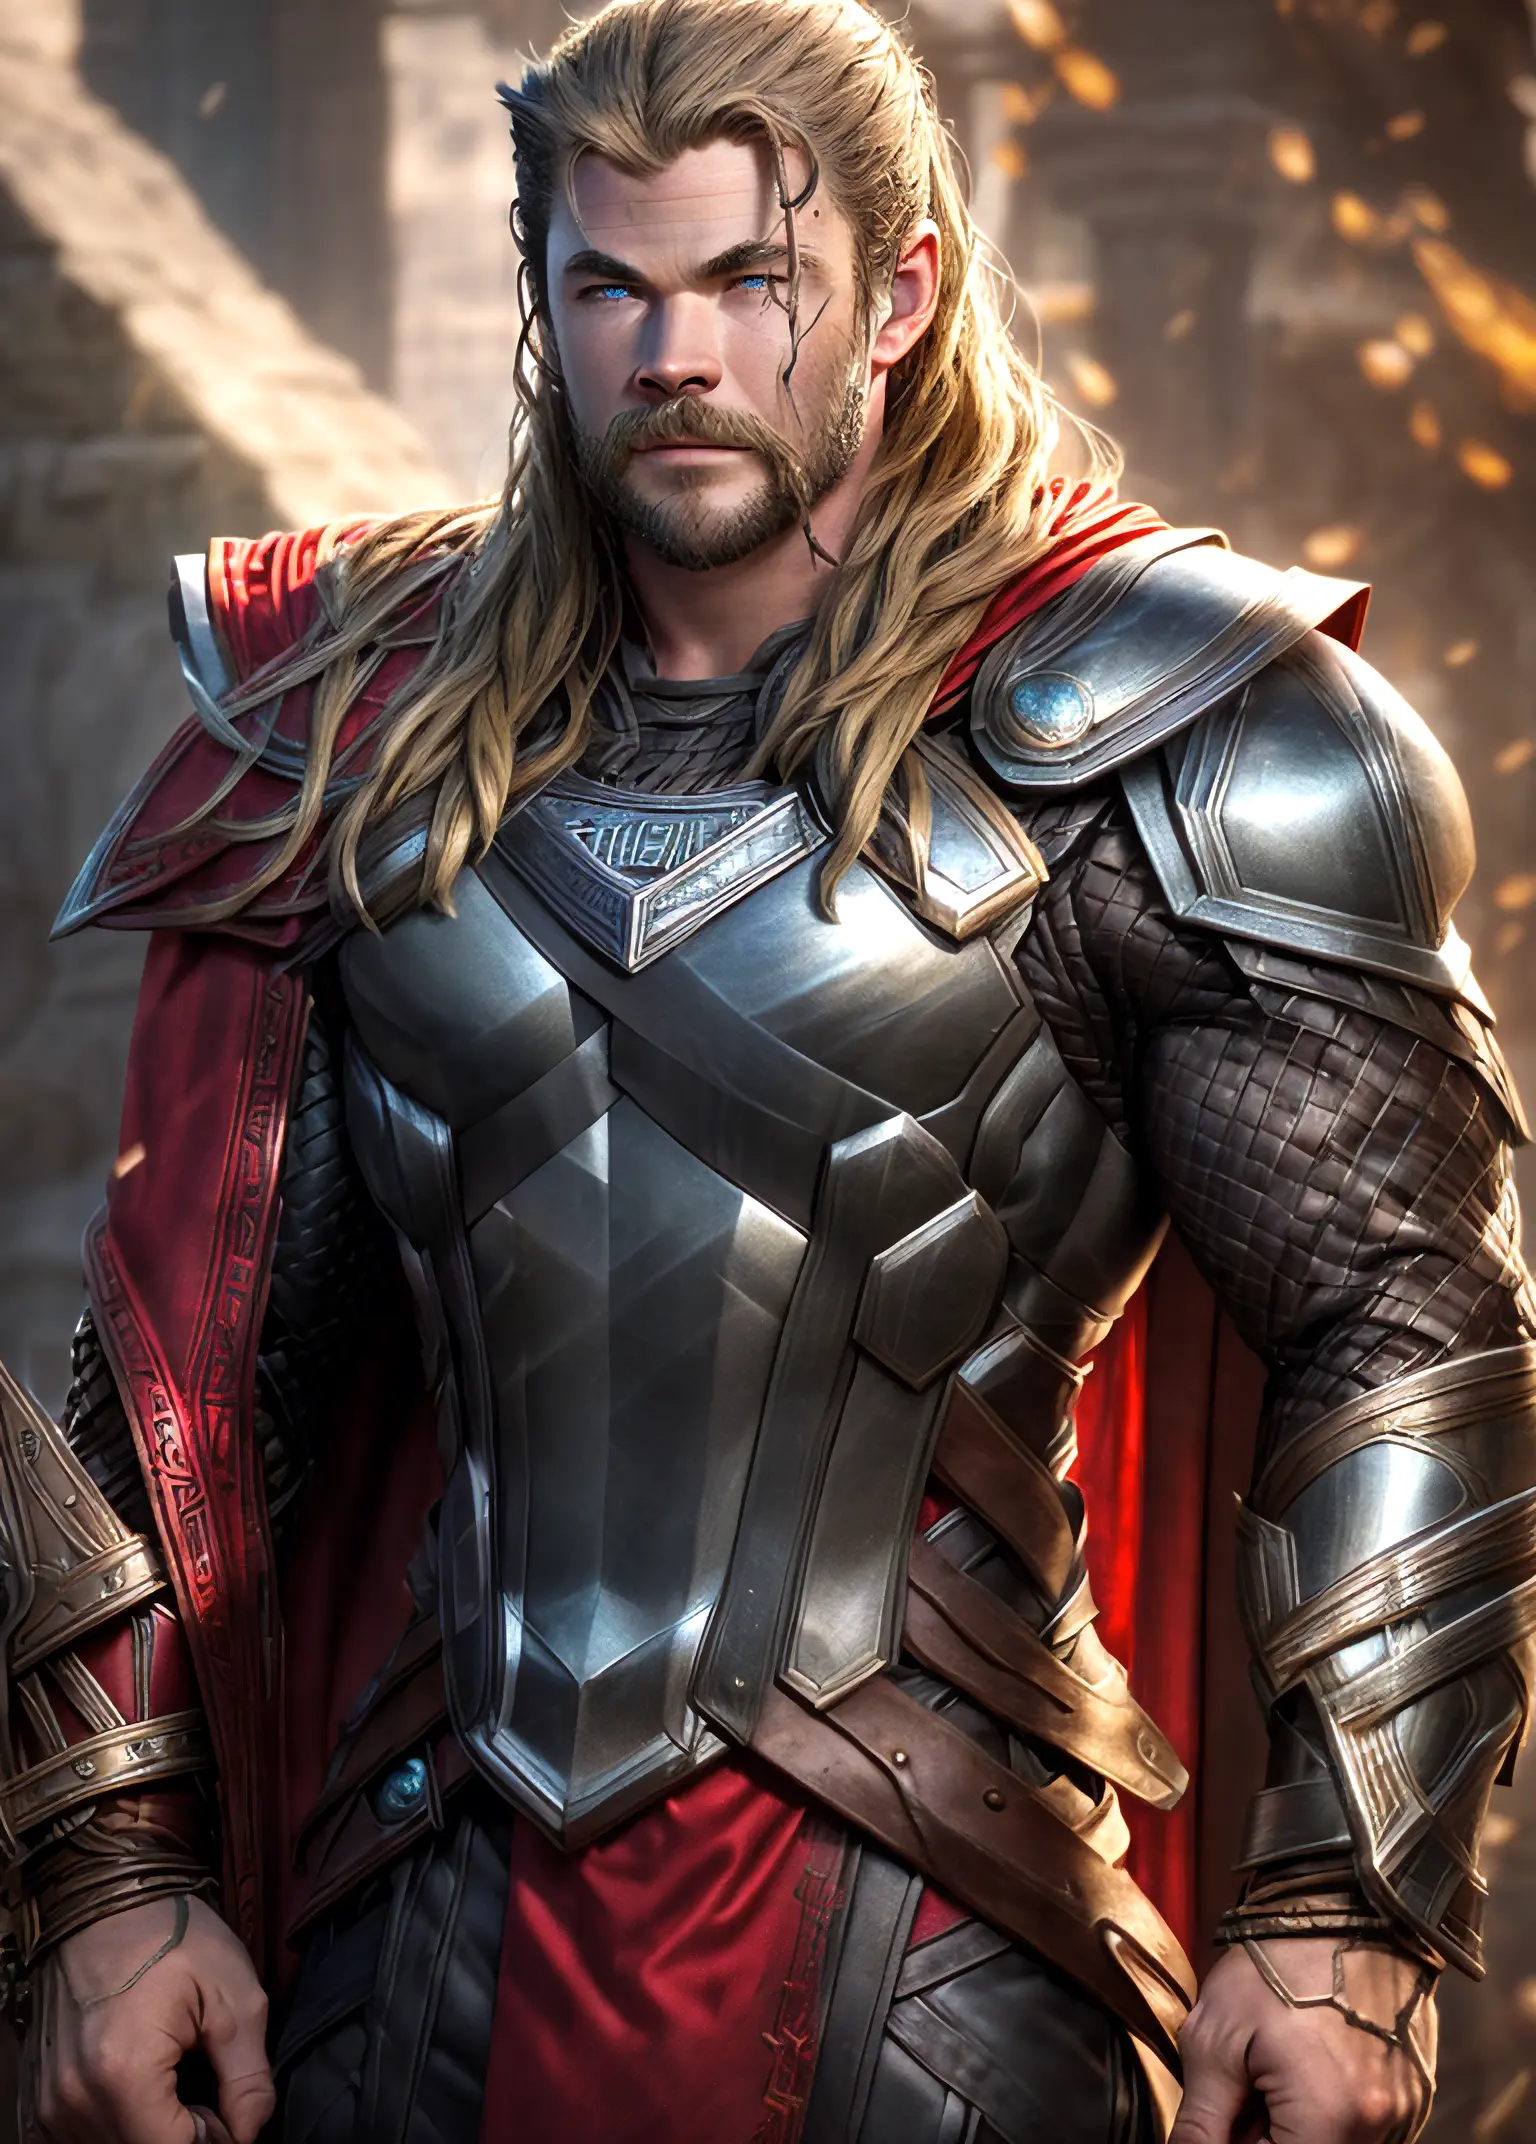 (photorealistic), (dramatic), (fantasy render), concept art, (full torso), (3/4 view:1.17), (Thor steampunk style), (((Thor Odinson|Chris Hemsworth))), brass:1.3, metals, gears, intricate, weathered, (red cape:1.33), realistic, volumetric lighting, simple background, masterpiece, centered